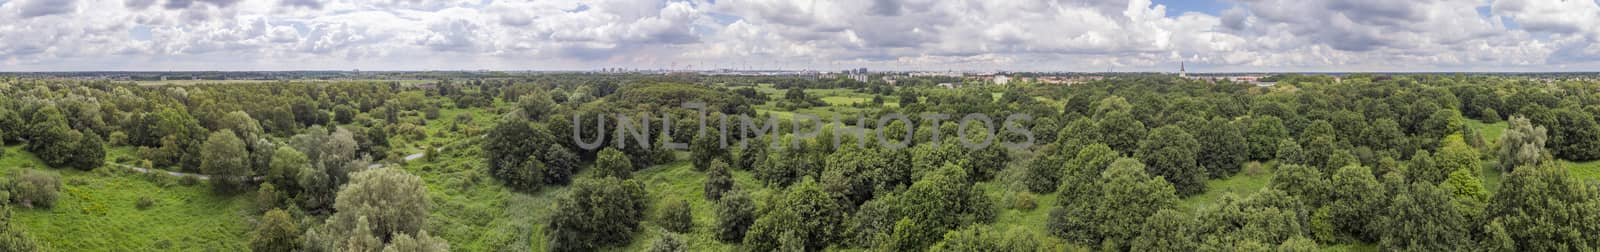 360 aerial panorama over Oude Landen nature park in Ekeren, with village and harbor in the distance by kb79